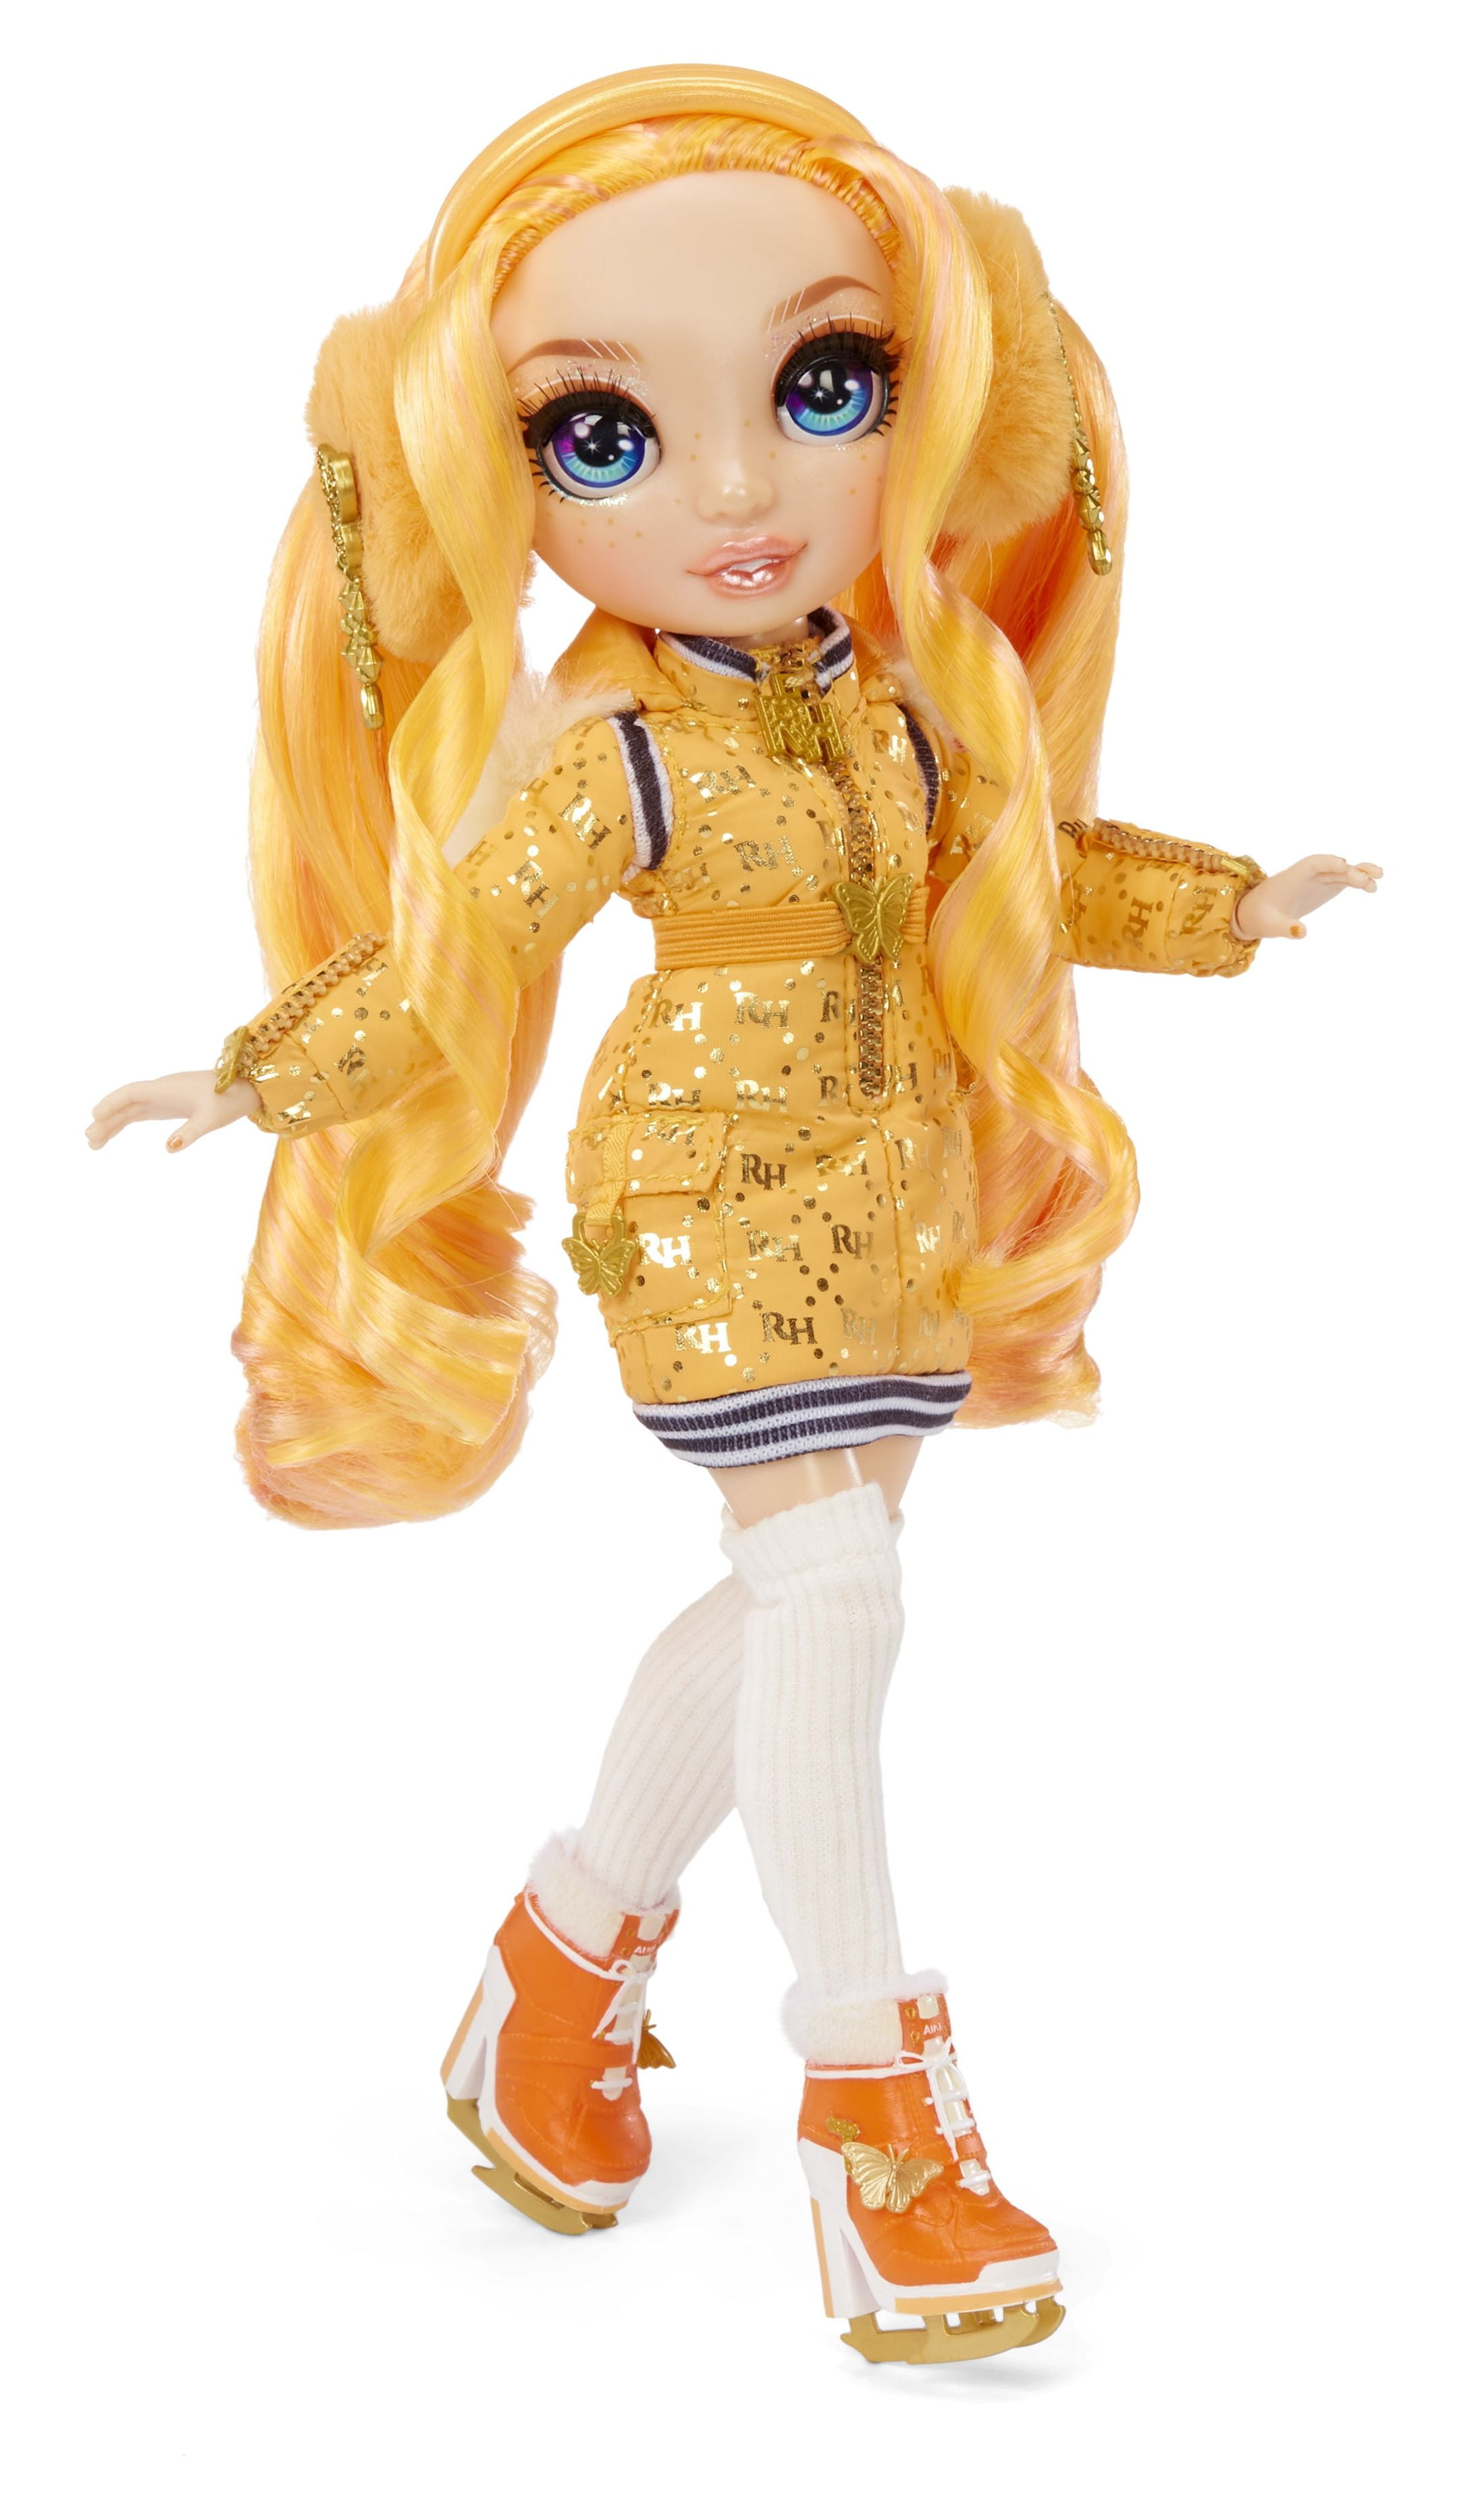 Surprise Rainbow High Poppy Rowan - Orange Clothes Fashion Doll with 2  Complete Mix & Match Outfits and Accessories, Toys for Kids 6 to 12 Years  Old,1 x 1 x 1 inches - Doll Shopaholic